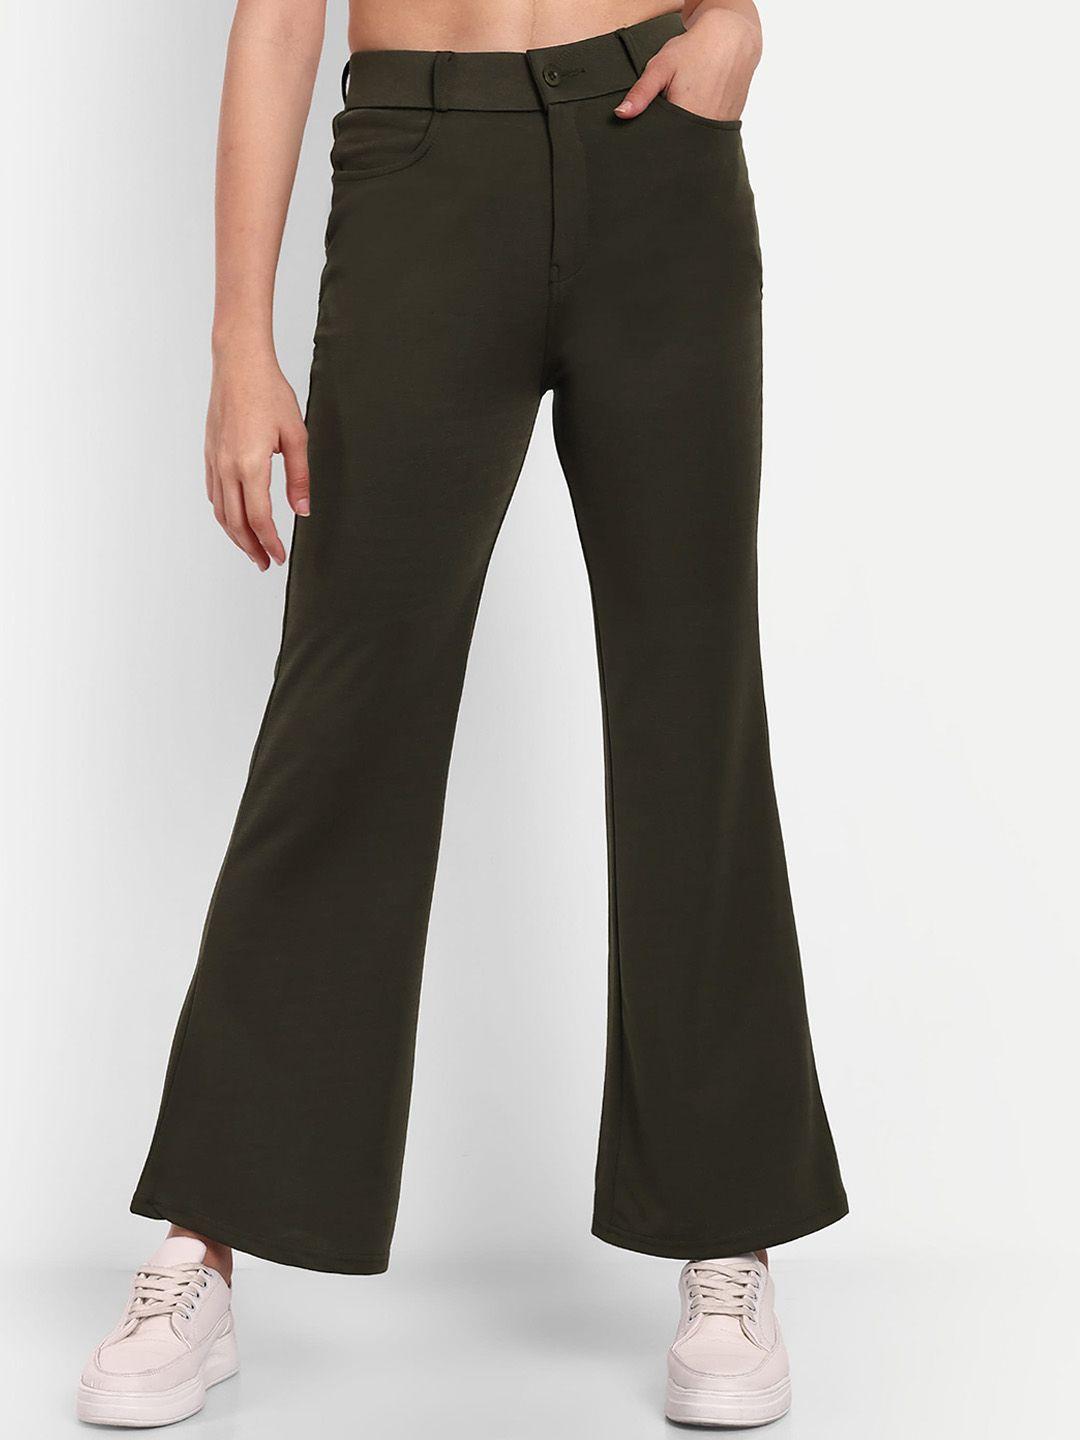 next-one-women-smart-flared-high-rise-easy-wash-trousers